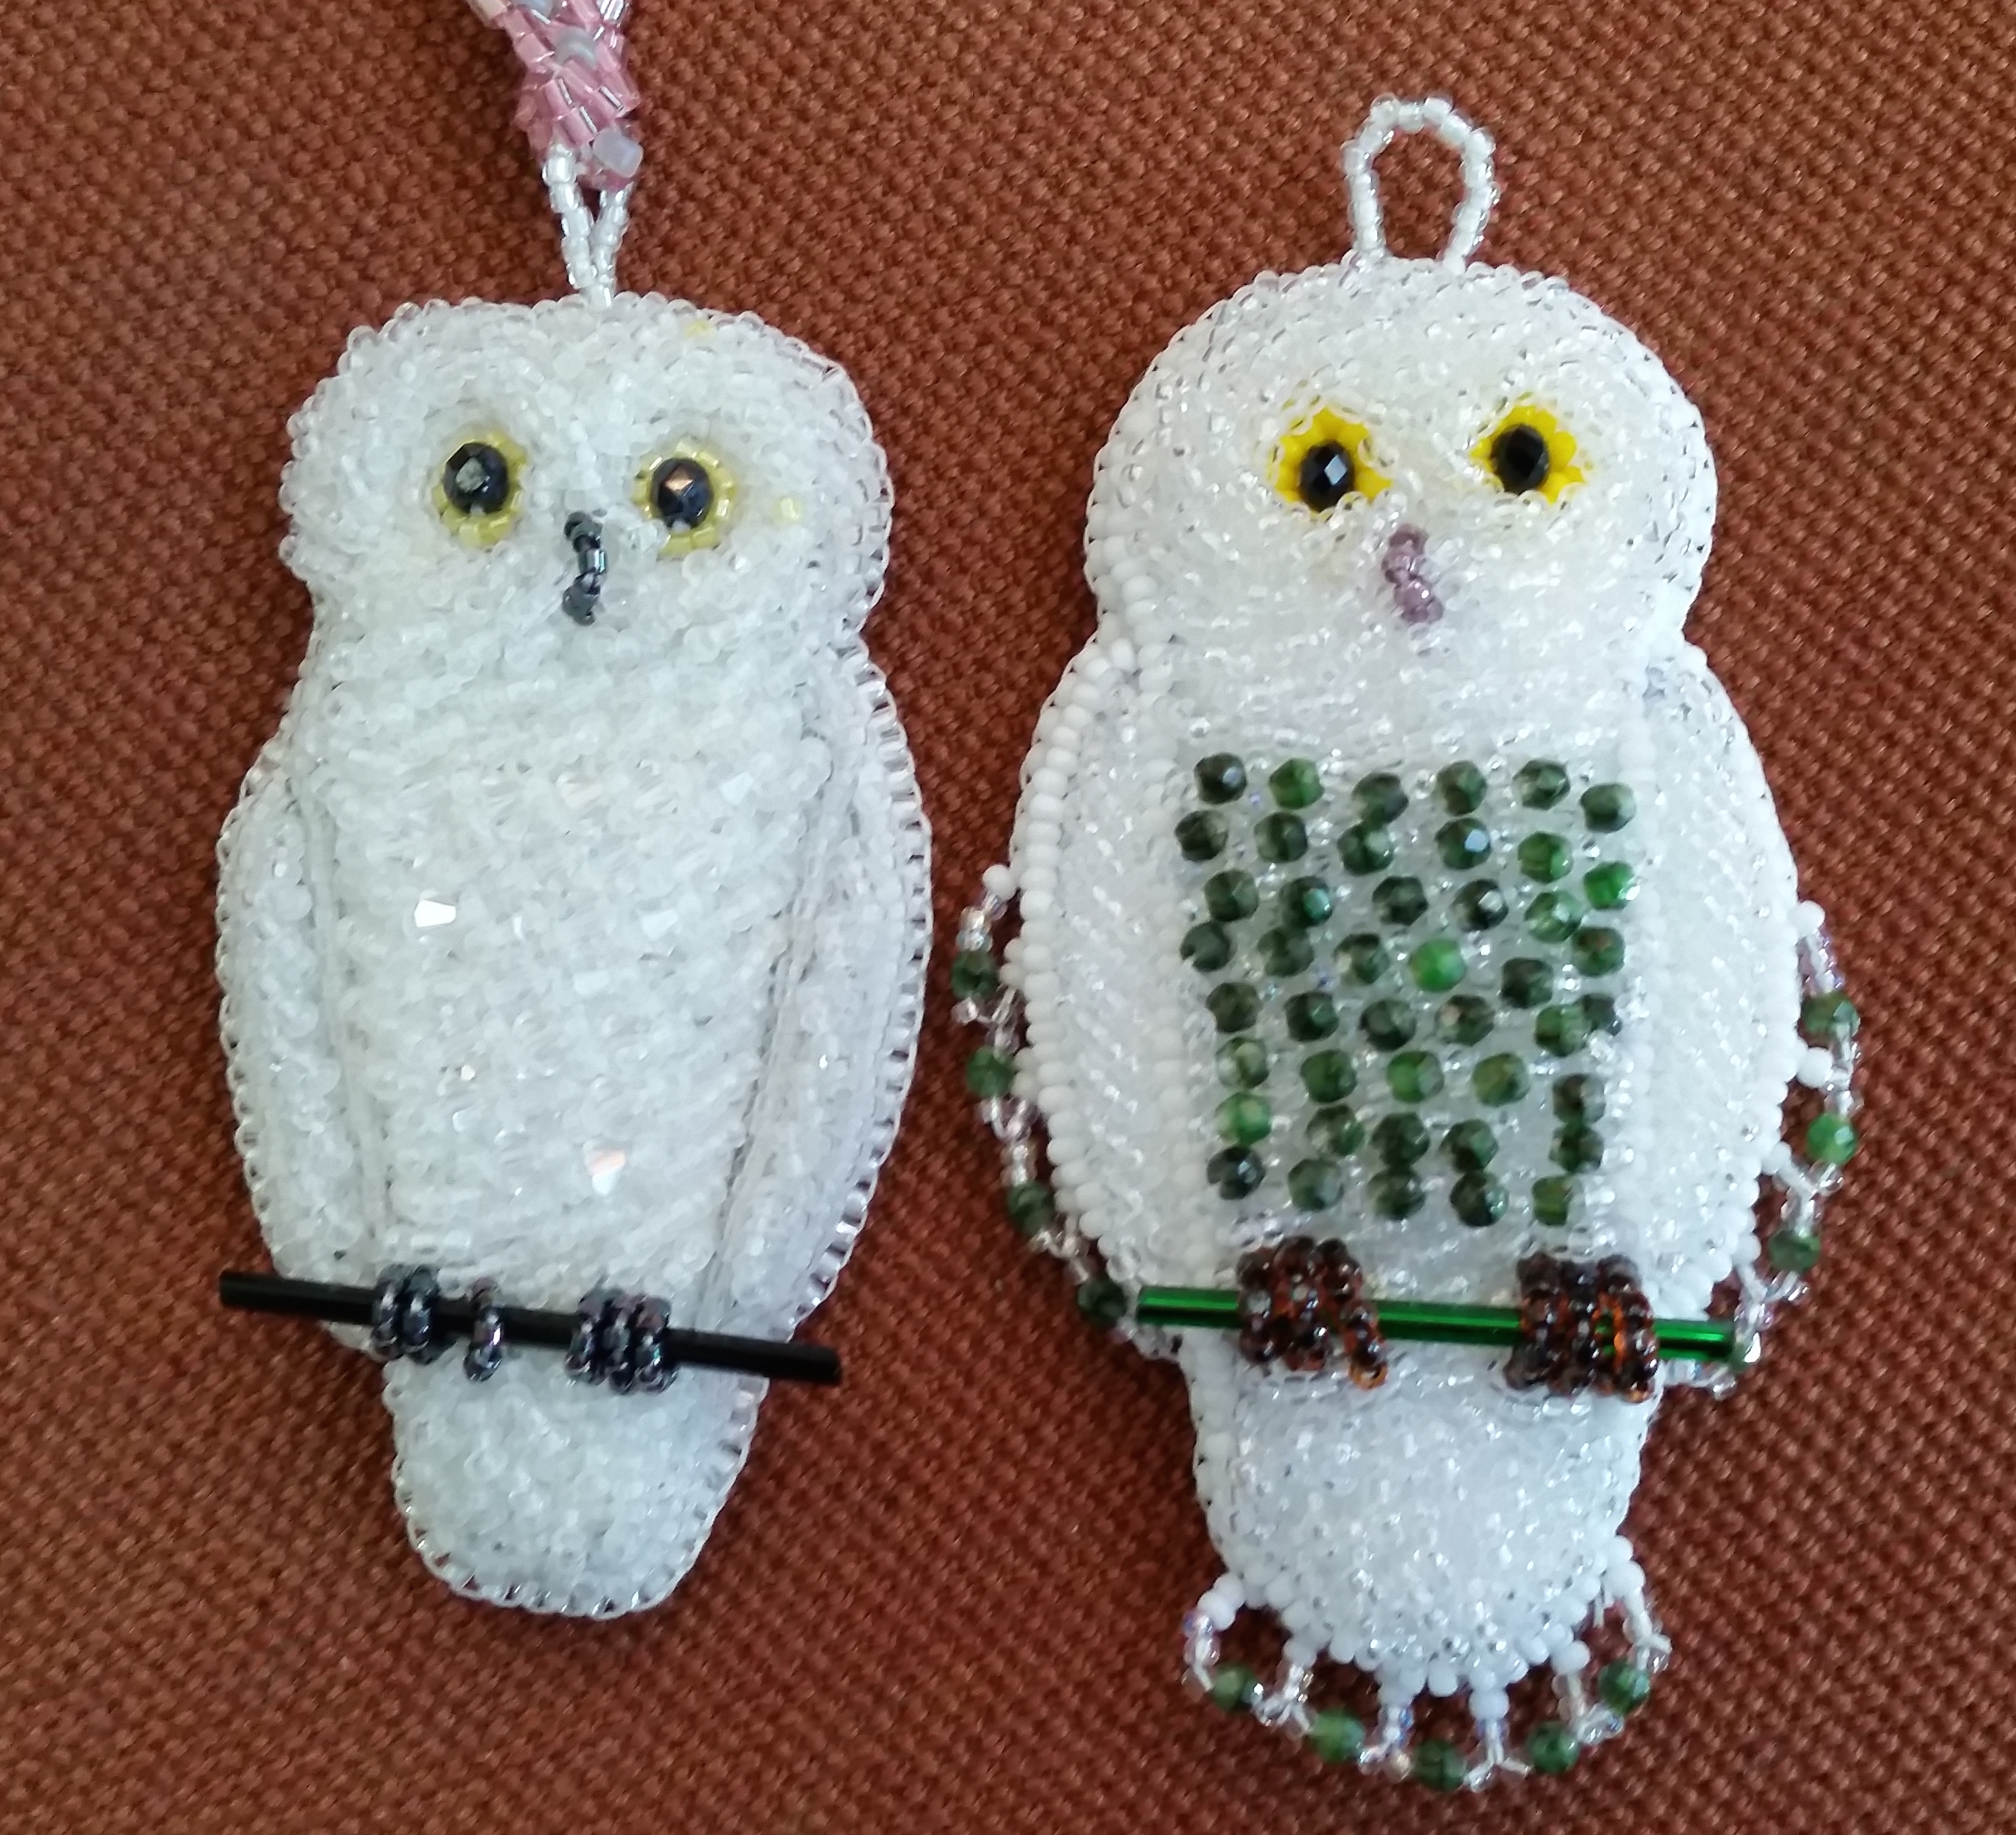 Owl Workshop planned for Aug. 15